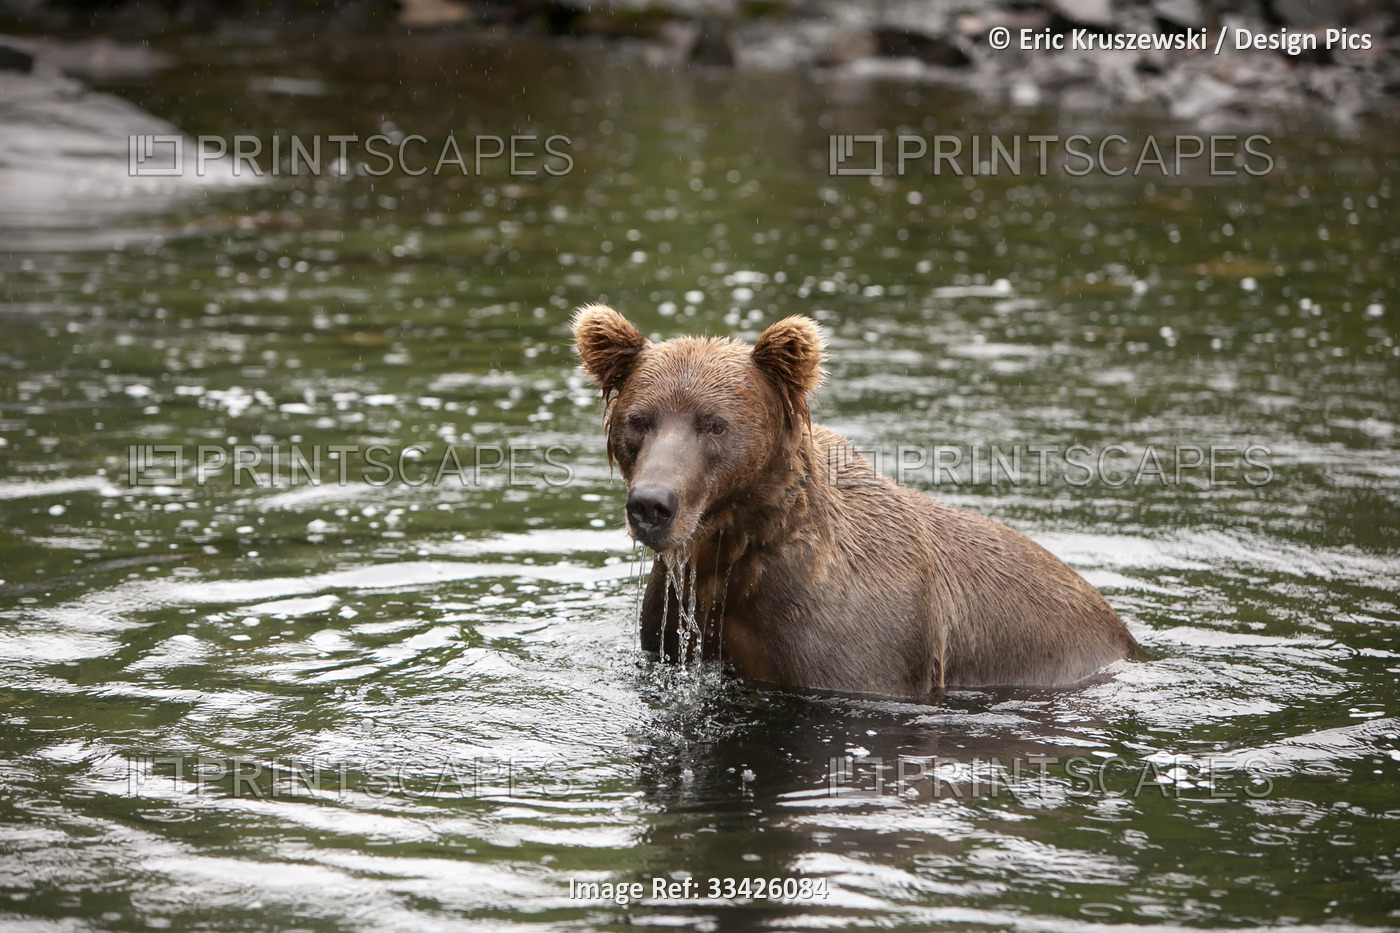 An Alaskan brown grizzly bear, Ursus arctos, stands in the water as it hunts ...